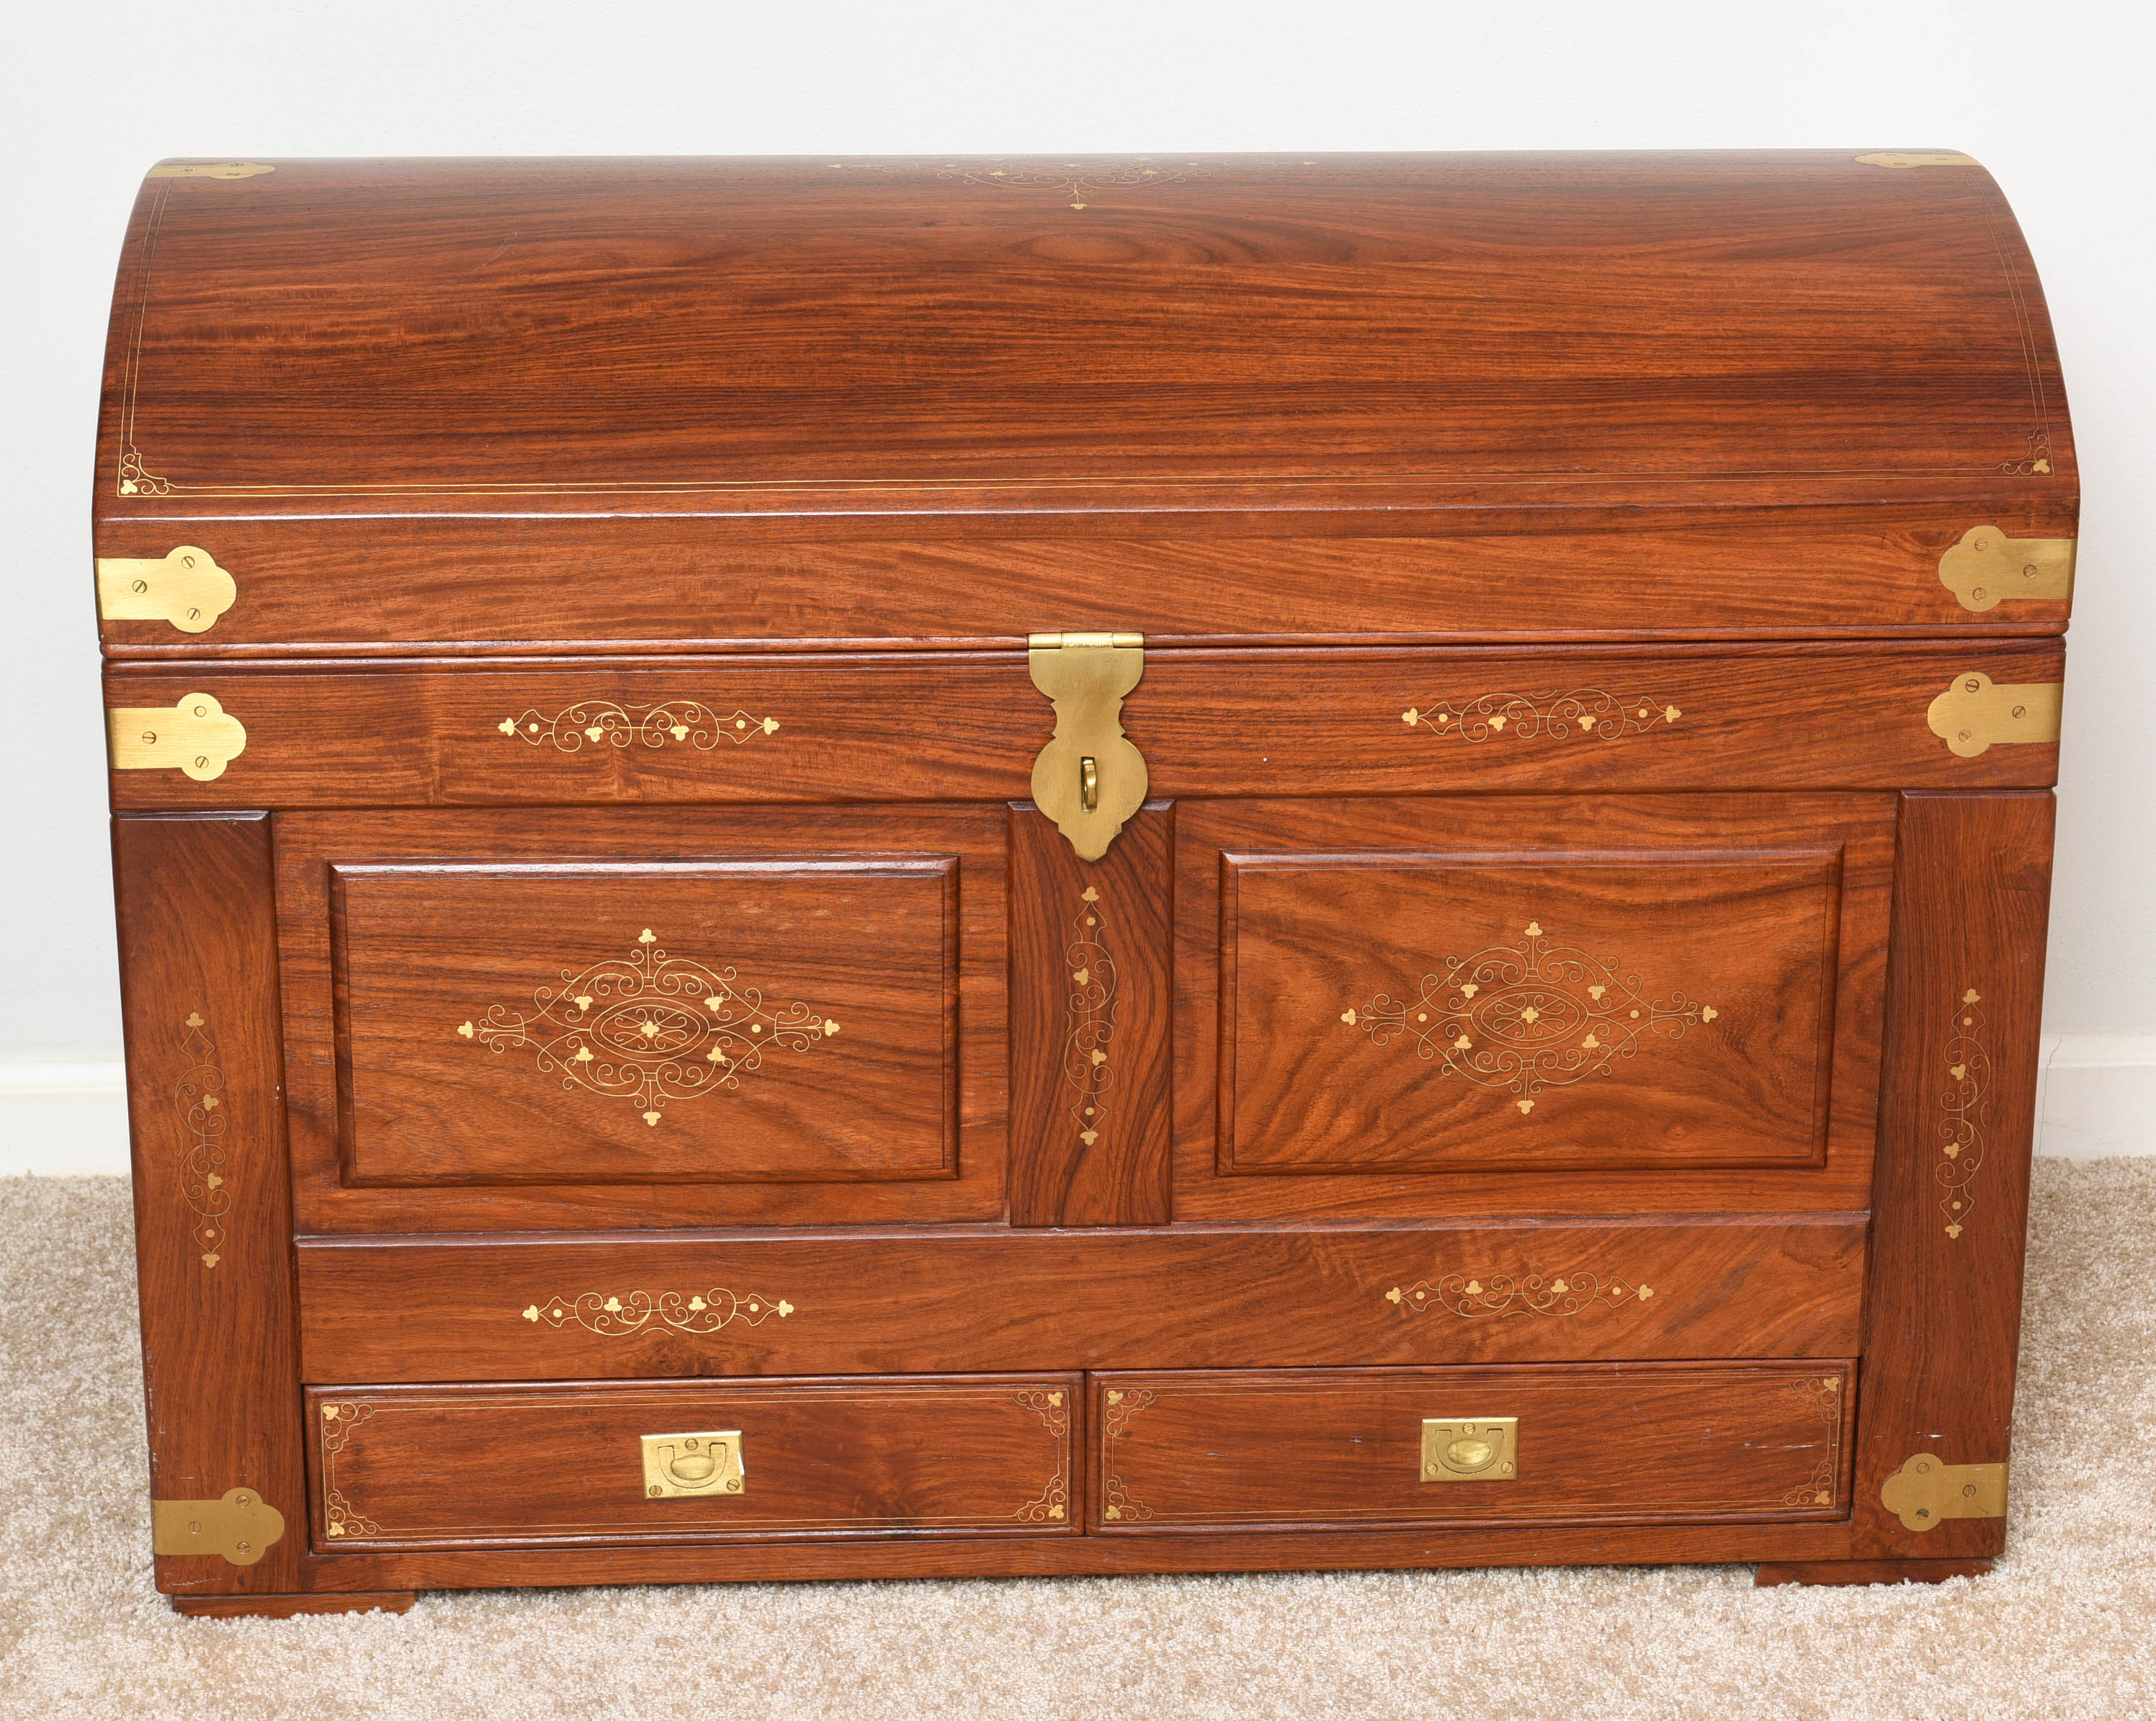 This styish hand-crafted Anglo-Indian domed-top teak wood trunk with its trefoil motif hinges, fine inlay and campaign hinges in brass makes for the ultimate storage piece. 

Note: The interior is fitted with two removable trays and there are two